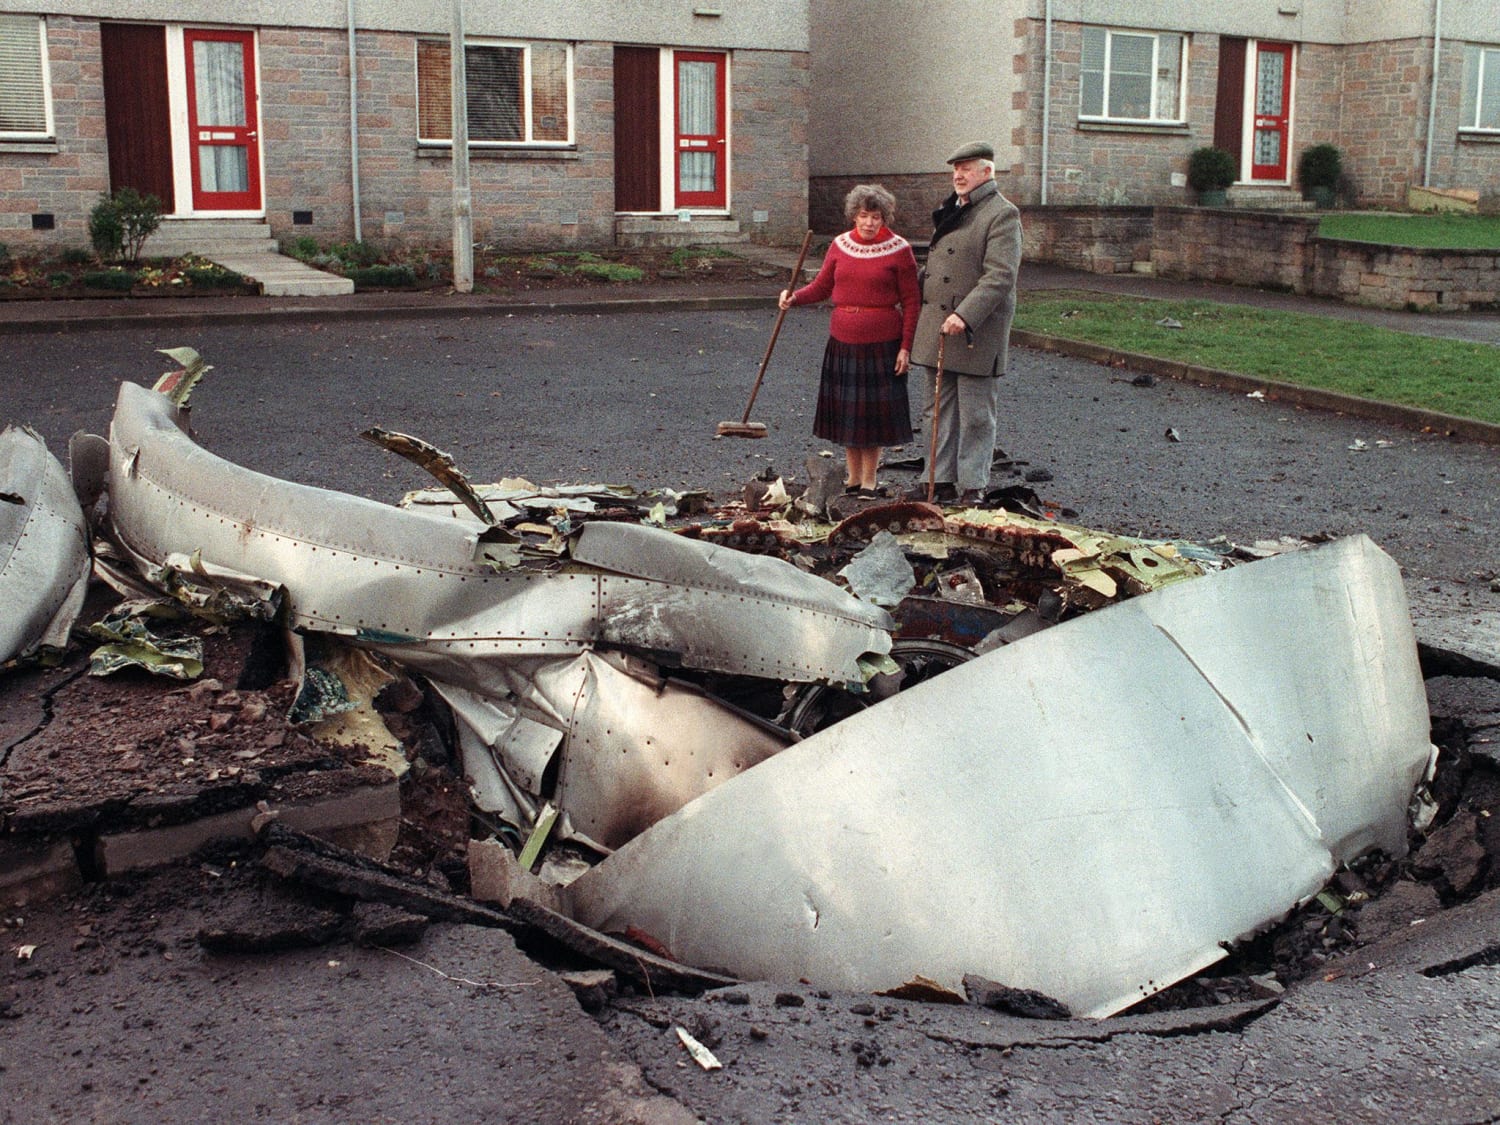 An elderly couple looks at some wreckage of "Clipper Maid of the Seas," the Pan Am 747-100 that came down on Lockerbie, Scotland after a bomb detonated killing all 259 onboard and 11 on the ground. Lockerbie Bombing December 1988